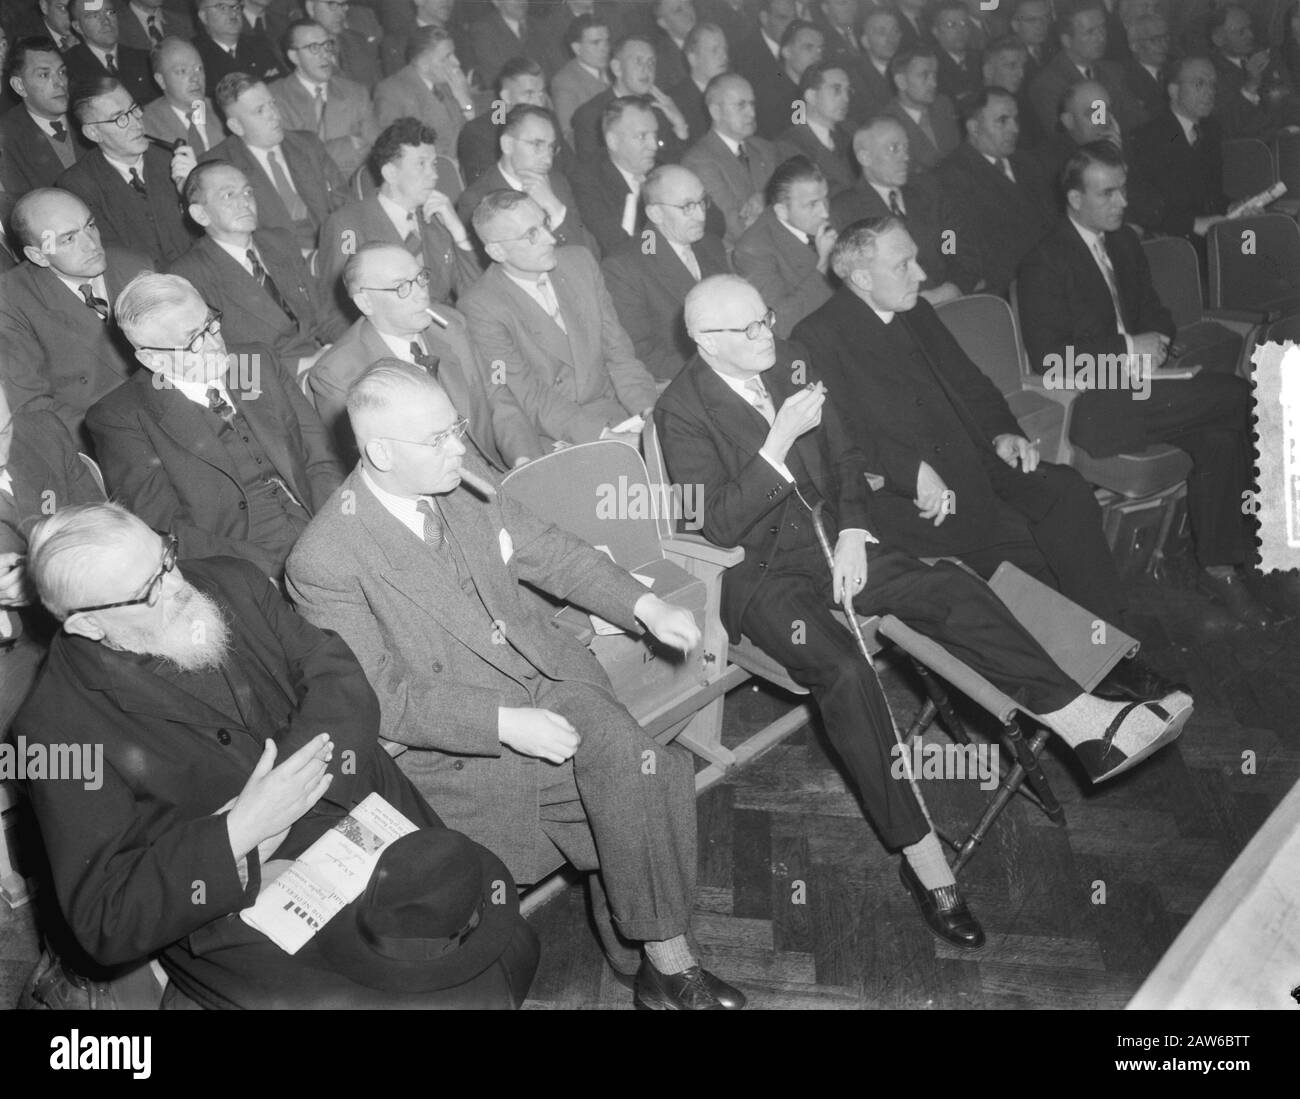 Wage Congress of the Catholic Workers' Movement (KAB) in Utrecht in building K & W. The chairman of the parliamentary group KVP, Prof. cpm.. Romme with injured foot was among the invitees. . Besides Prof. Romme is Dr. Olierook. Date: October 13, 1953 Location: Utrecht Keywords: congresses, trade unions, unions Person Name: Kab, Romme Stock Photo